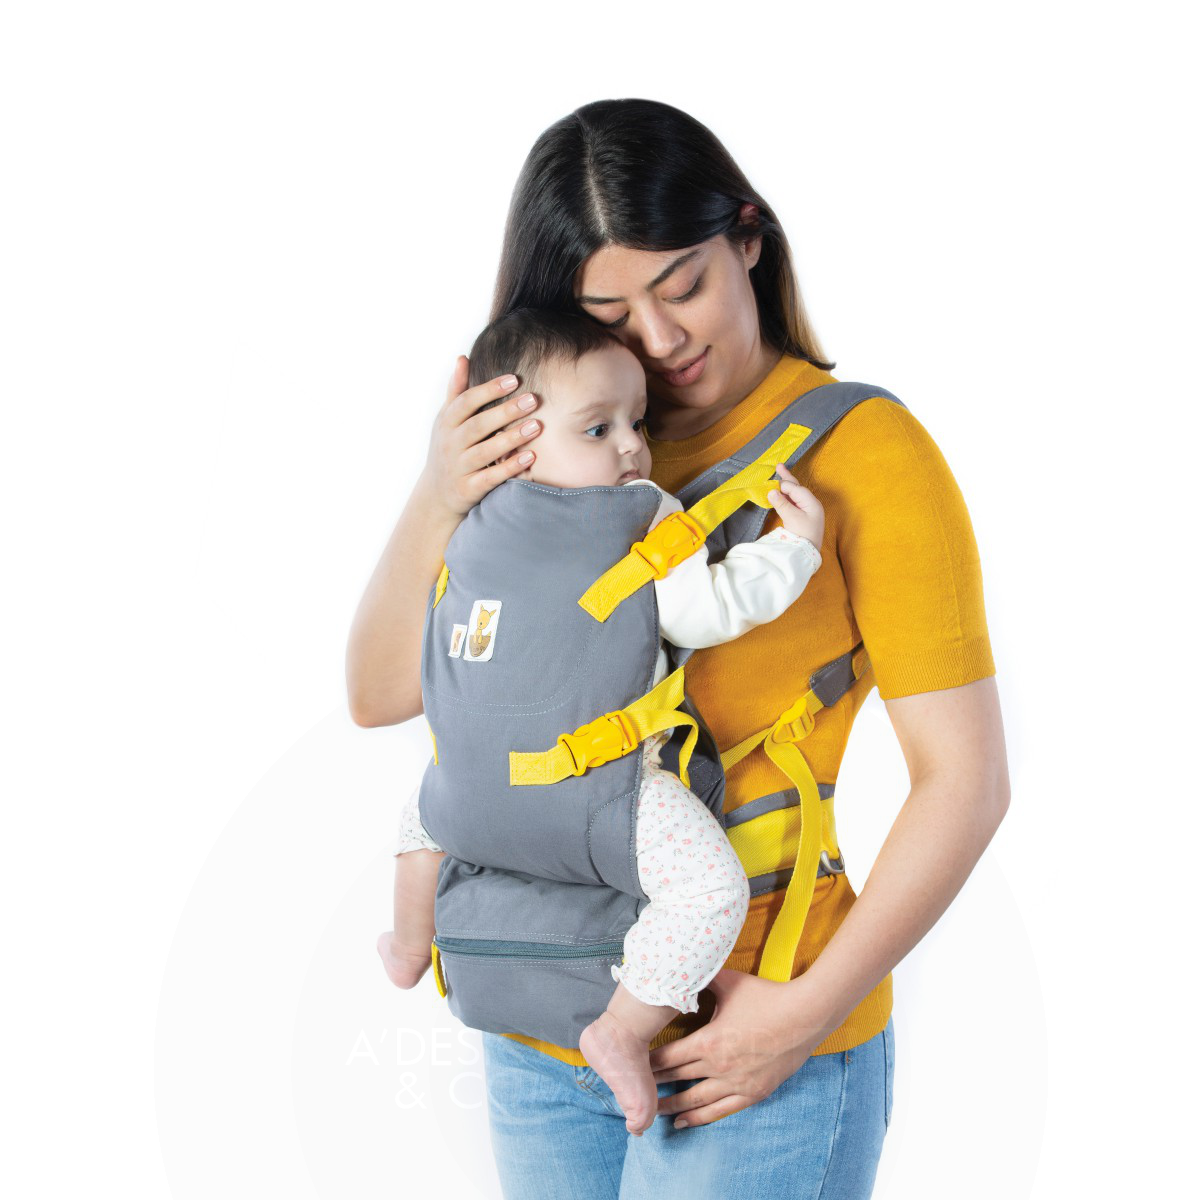 Fatemeh Sadeghi wins Bronze at the prestigious A' Baby, Kids and Children's Products Design Award with Kango Baby Multifunctional Carrier.